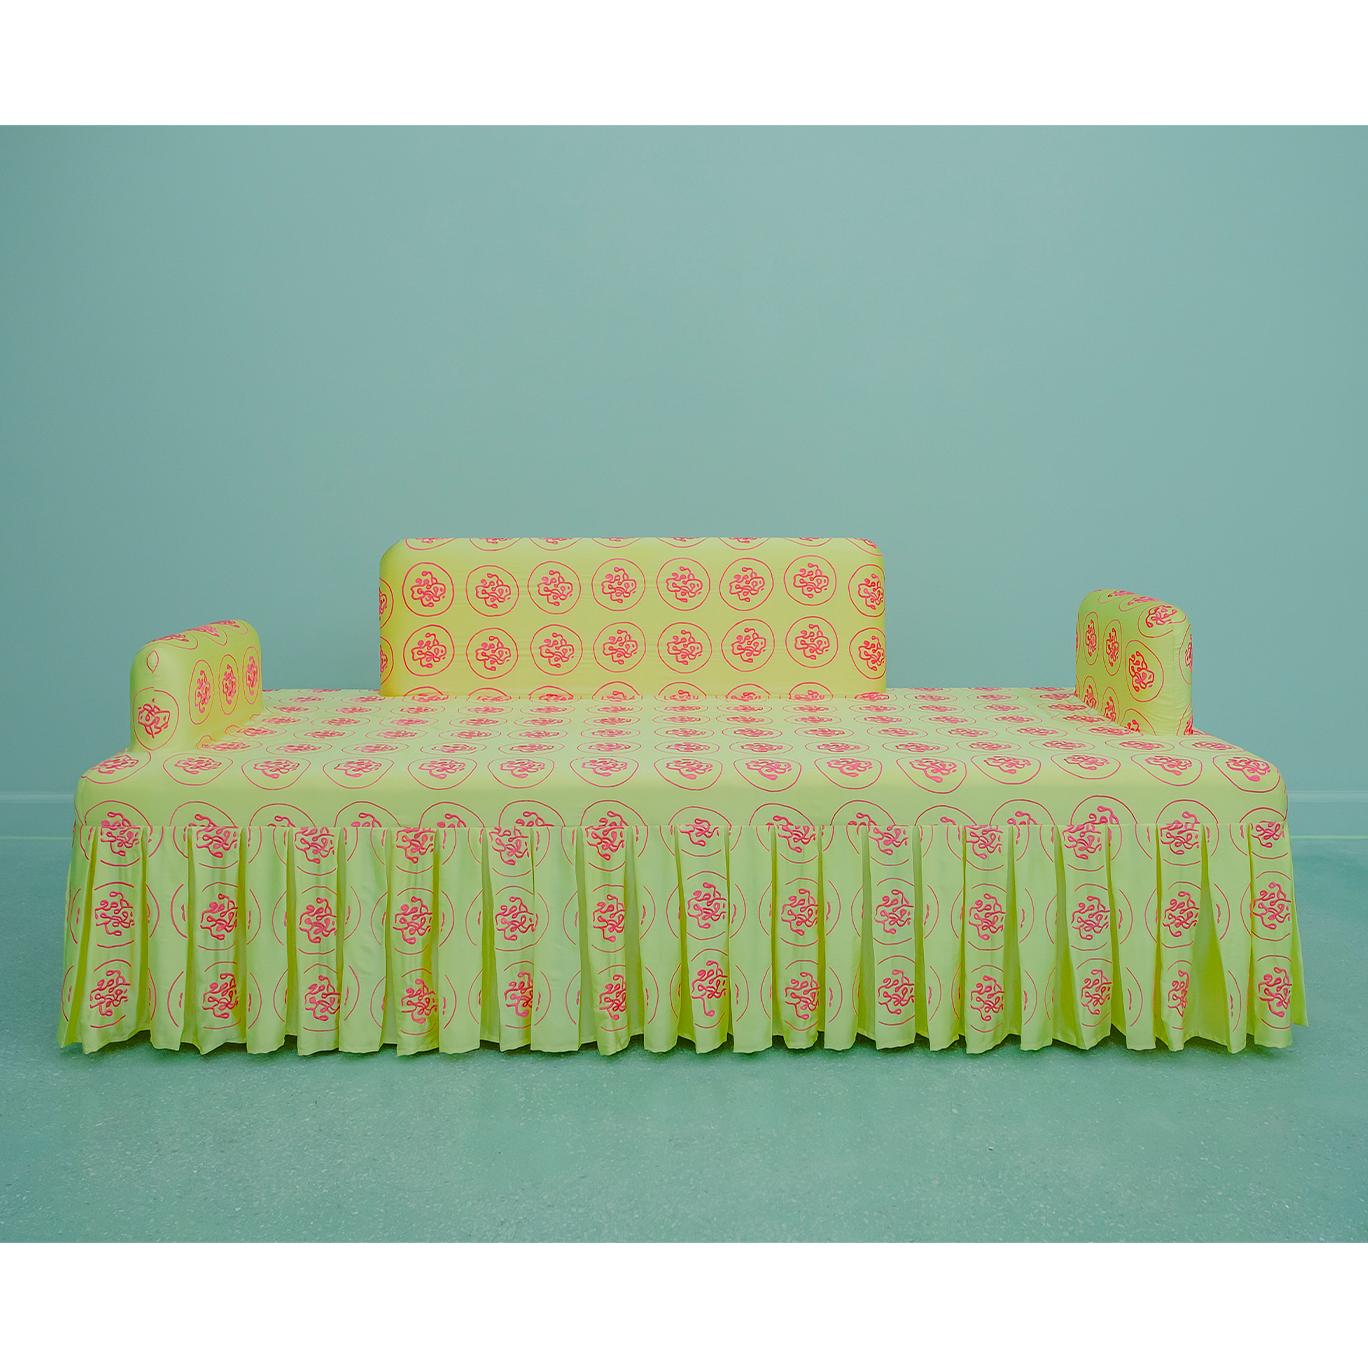 “Vitamin D” sofa is inspired by the artistic form of classical Chinese furniture such as those in temples and imperial courts. It is completely covered in fine silk, hand-embroidered with the molecular geometry of Vitamin D, the vitamin related to